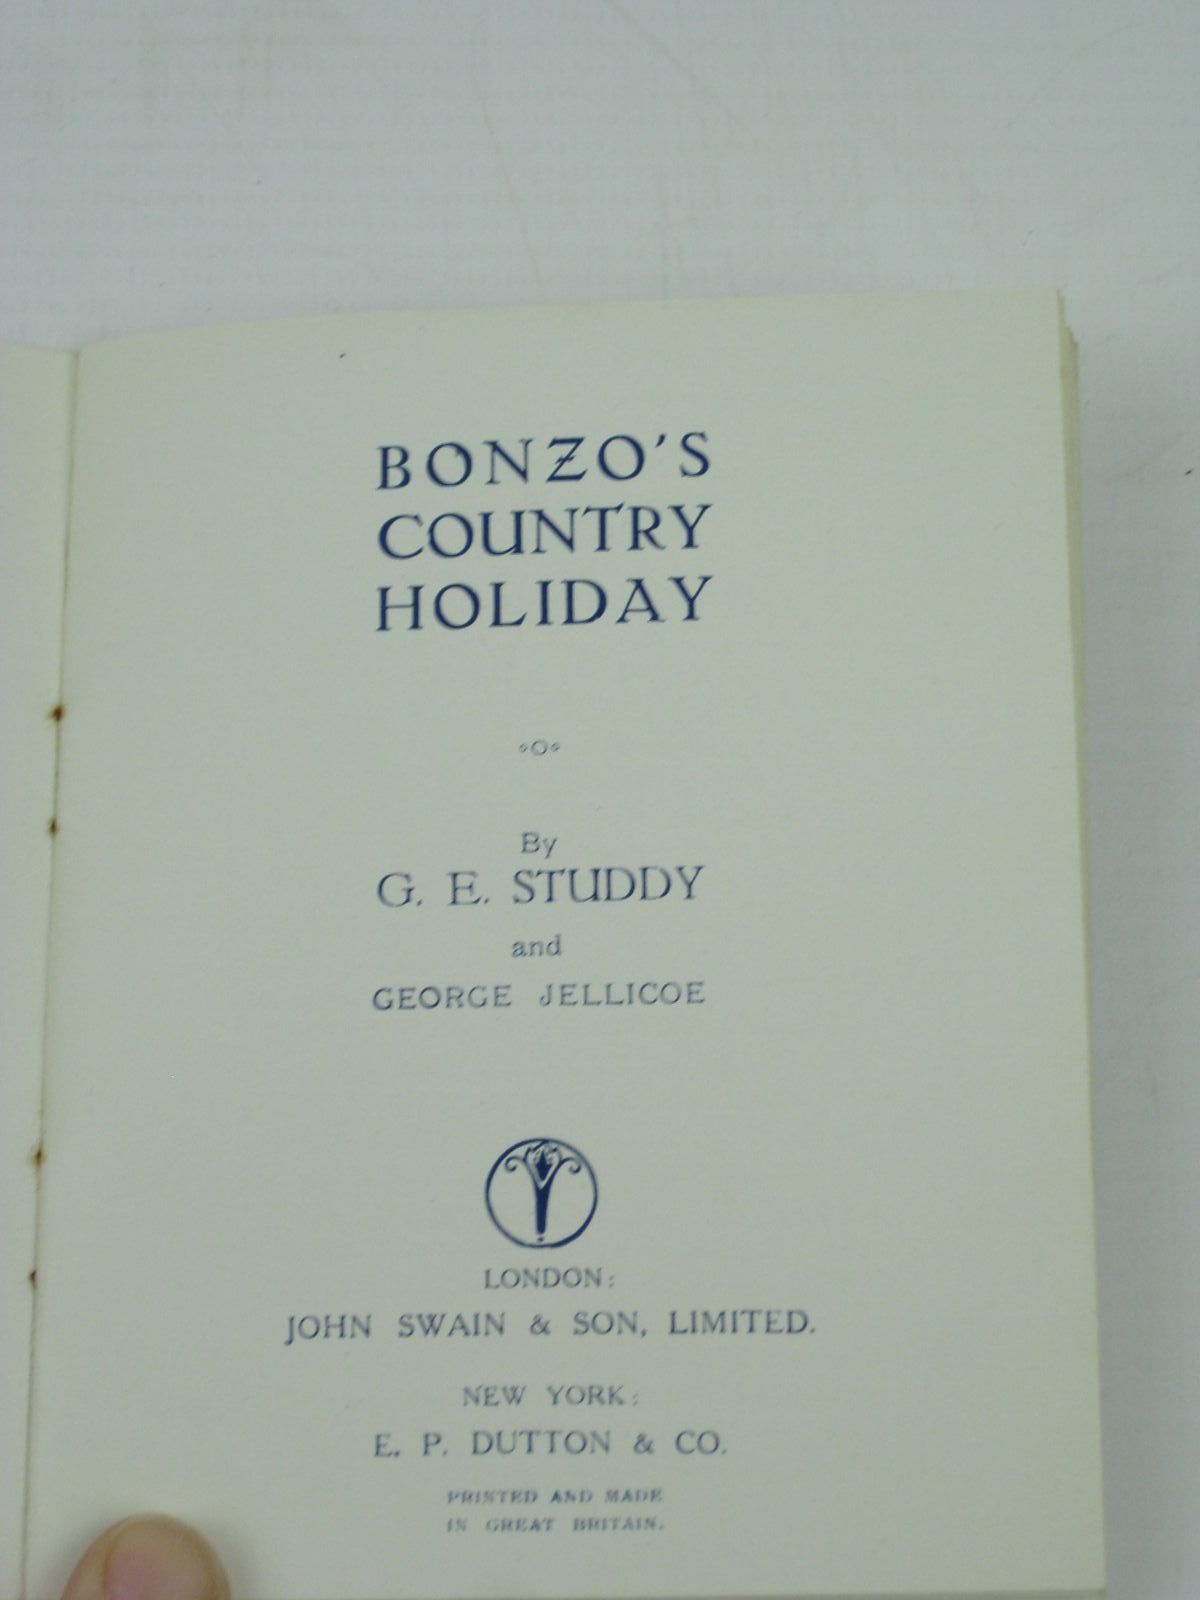 Photo of BONZO'S COUNTRY HOLIDAY written by Studdy, G.E.
Jellicoe, George illustrated by Studdy, G.E. published by John Swain & Son Limited, E.P. Dutton & Co. (STOCK CODE: 1406355)  for sale by Stella & Rose's Books